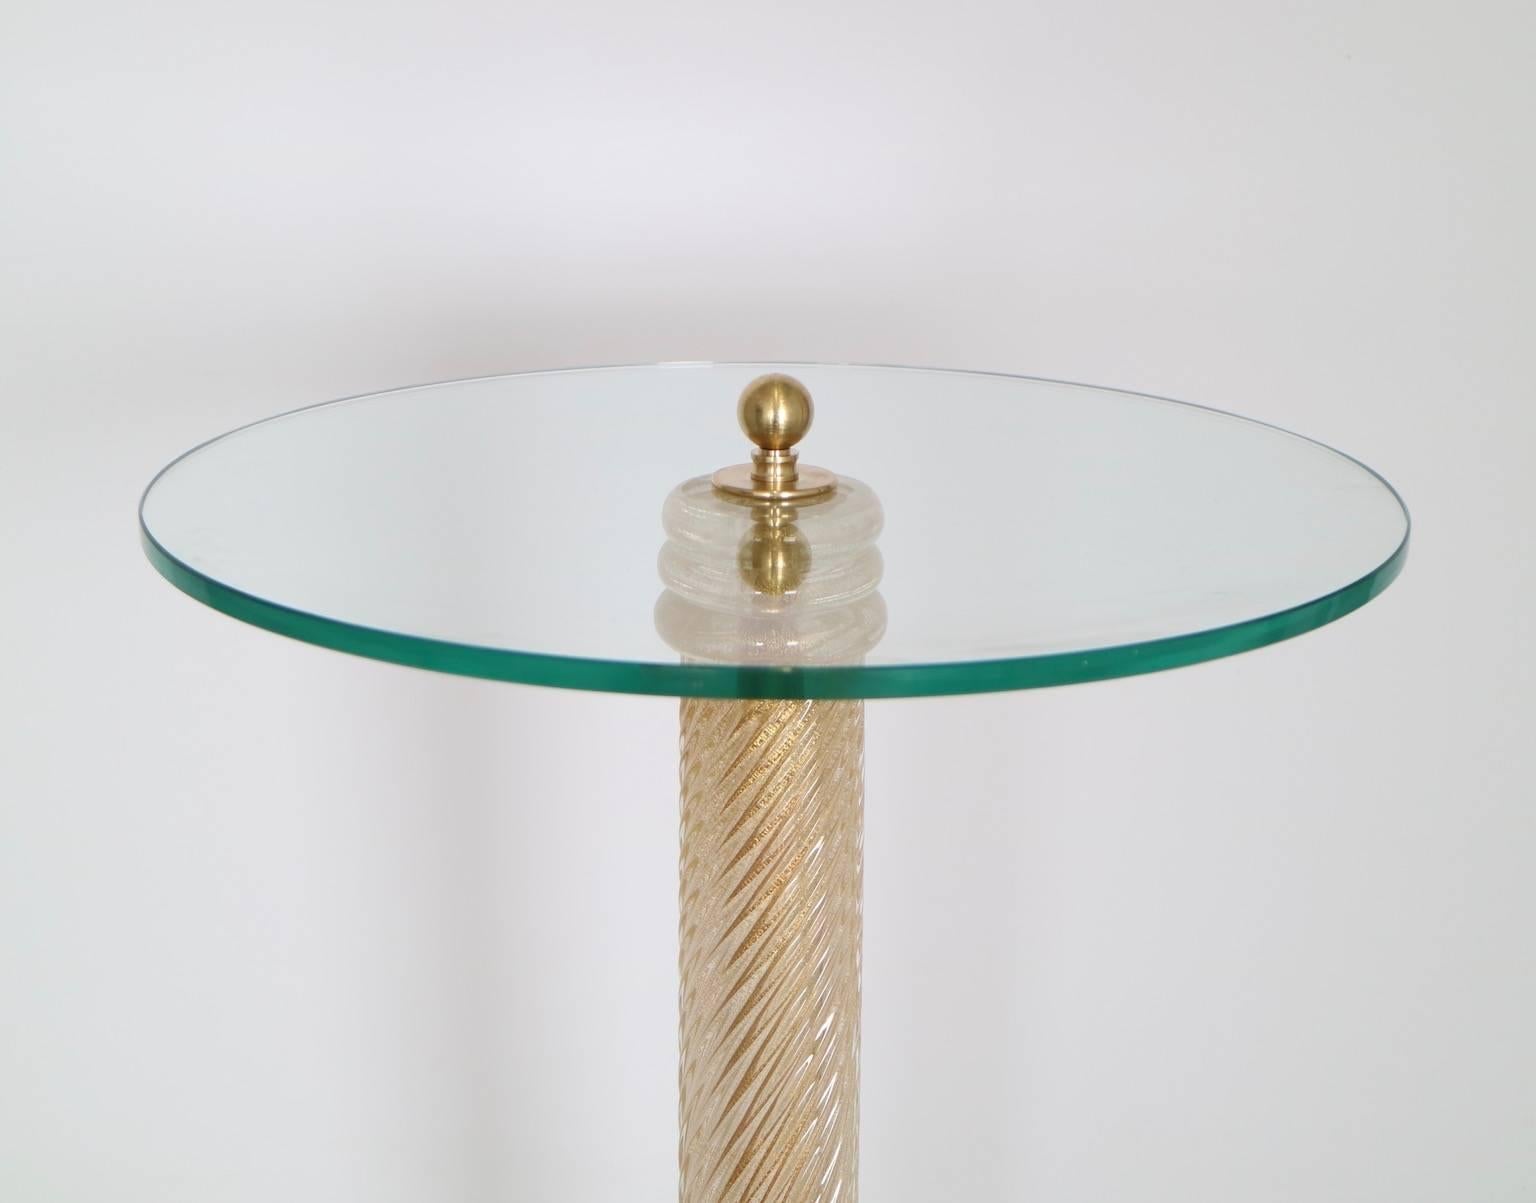 A Hollywood Regency Murano glass side table with circular top on Murano  glass pedestal with swirled gold flakes. The table is mounted on a circular gilded wooden base. The table top is in clear glass. This table is in excellent vintage condition